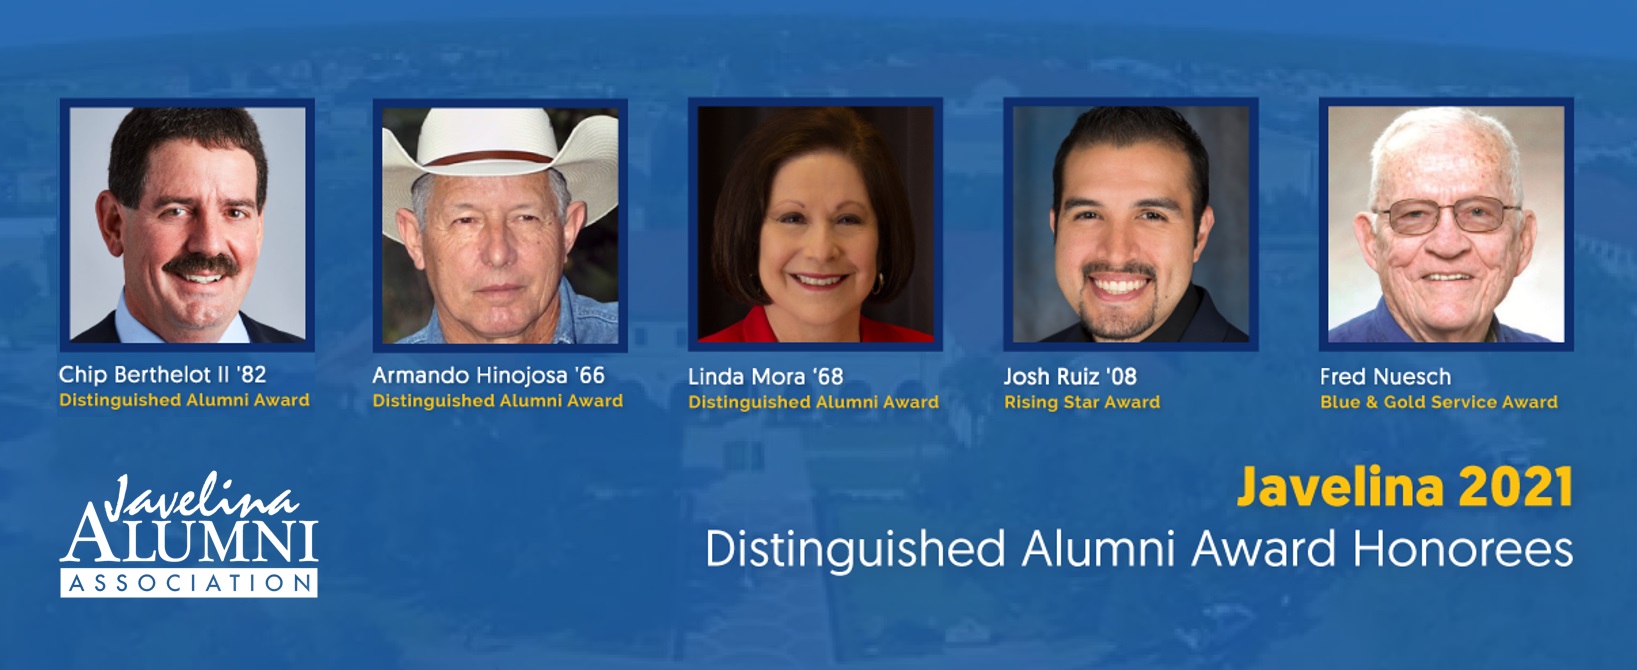 This year’s Distinguished Alumni Award recipients are Armando Hinojosa ’66; Dr. Linda Mora ’68; and I.J. “Chip” Berthelot II ’82. This year’s Rising Star Award recipient is Josh Ruiz ’08, and the Blue and Gold Service Award will honor longtime university staff member Fred Nuesch.  